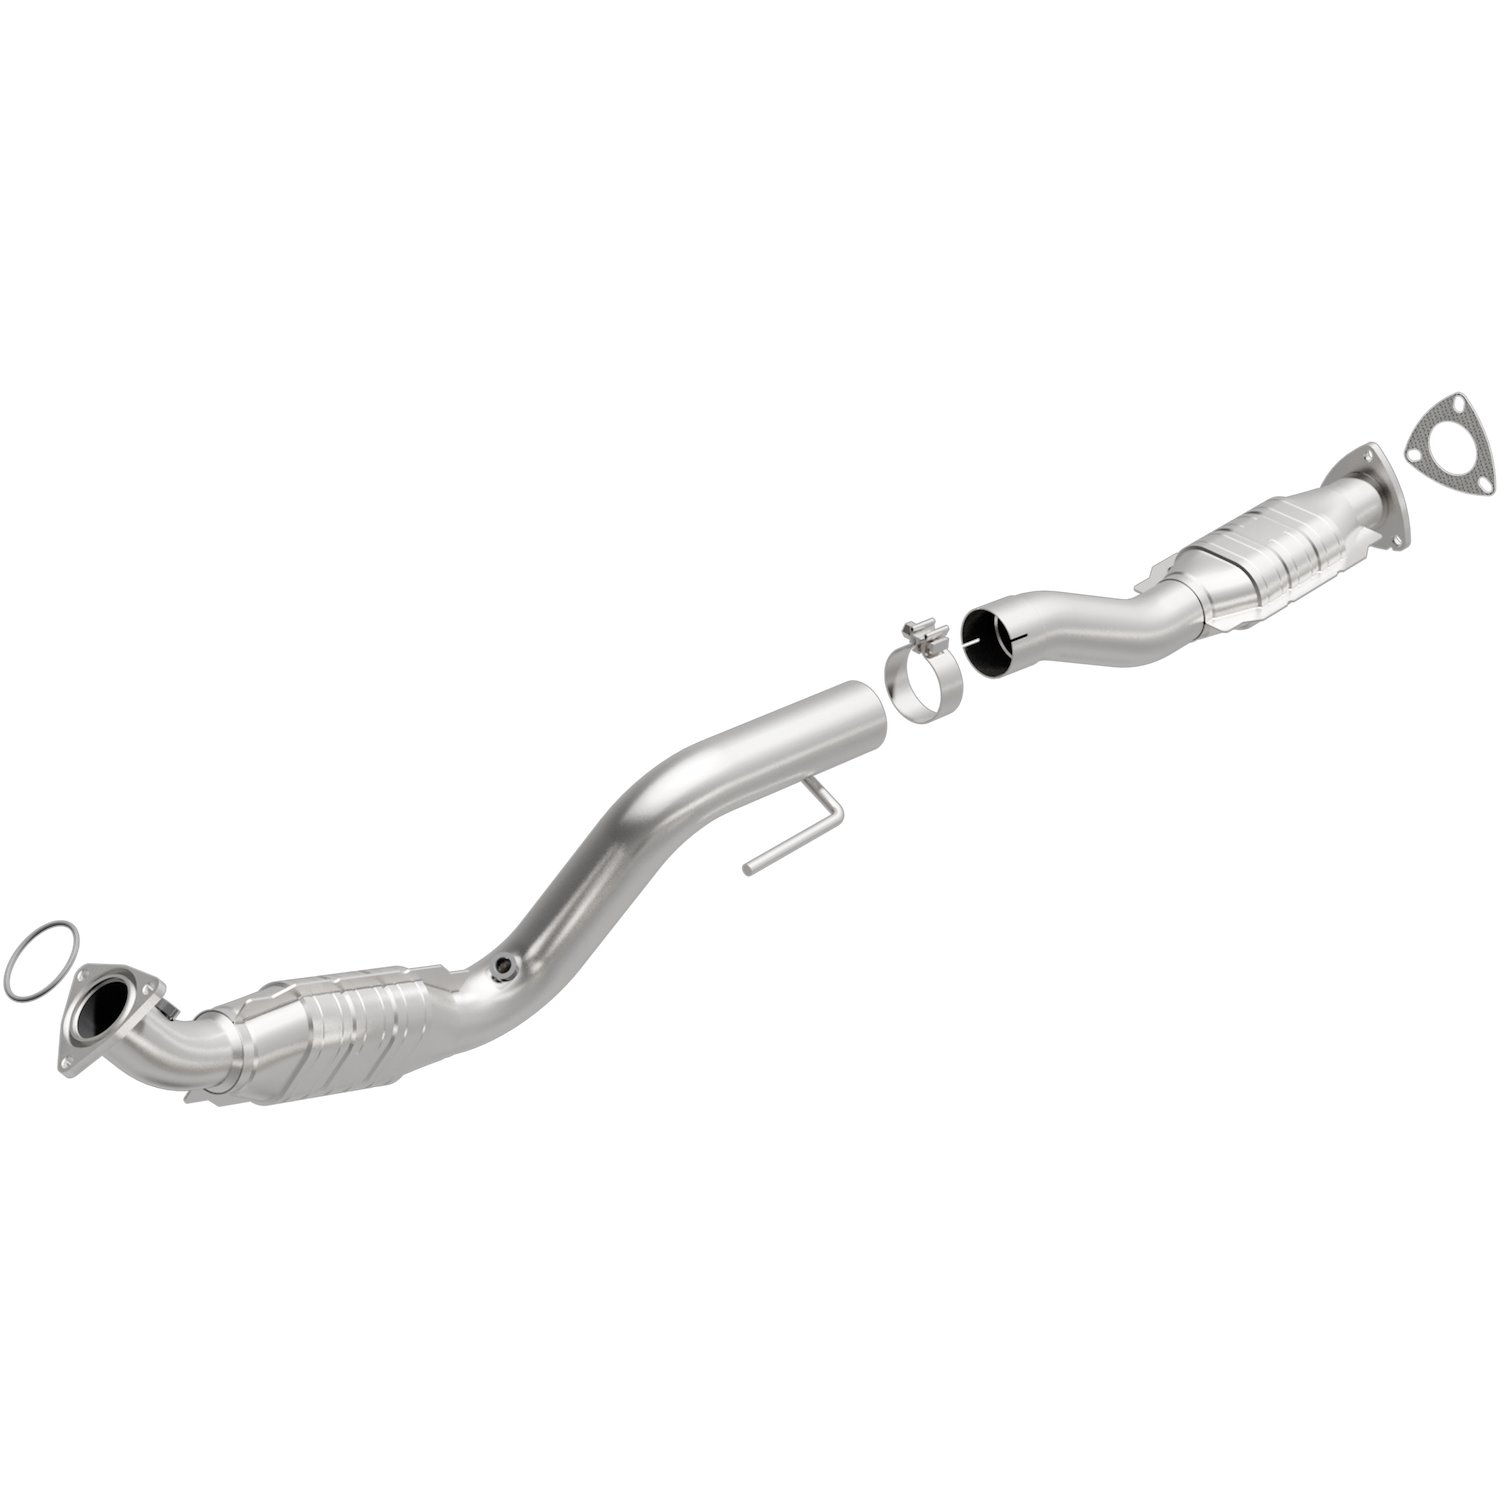 OEM Grade Federal / EPA Compliant Direct-Fit Catalytic Converter 51534